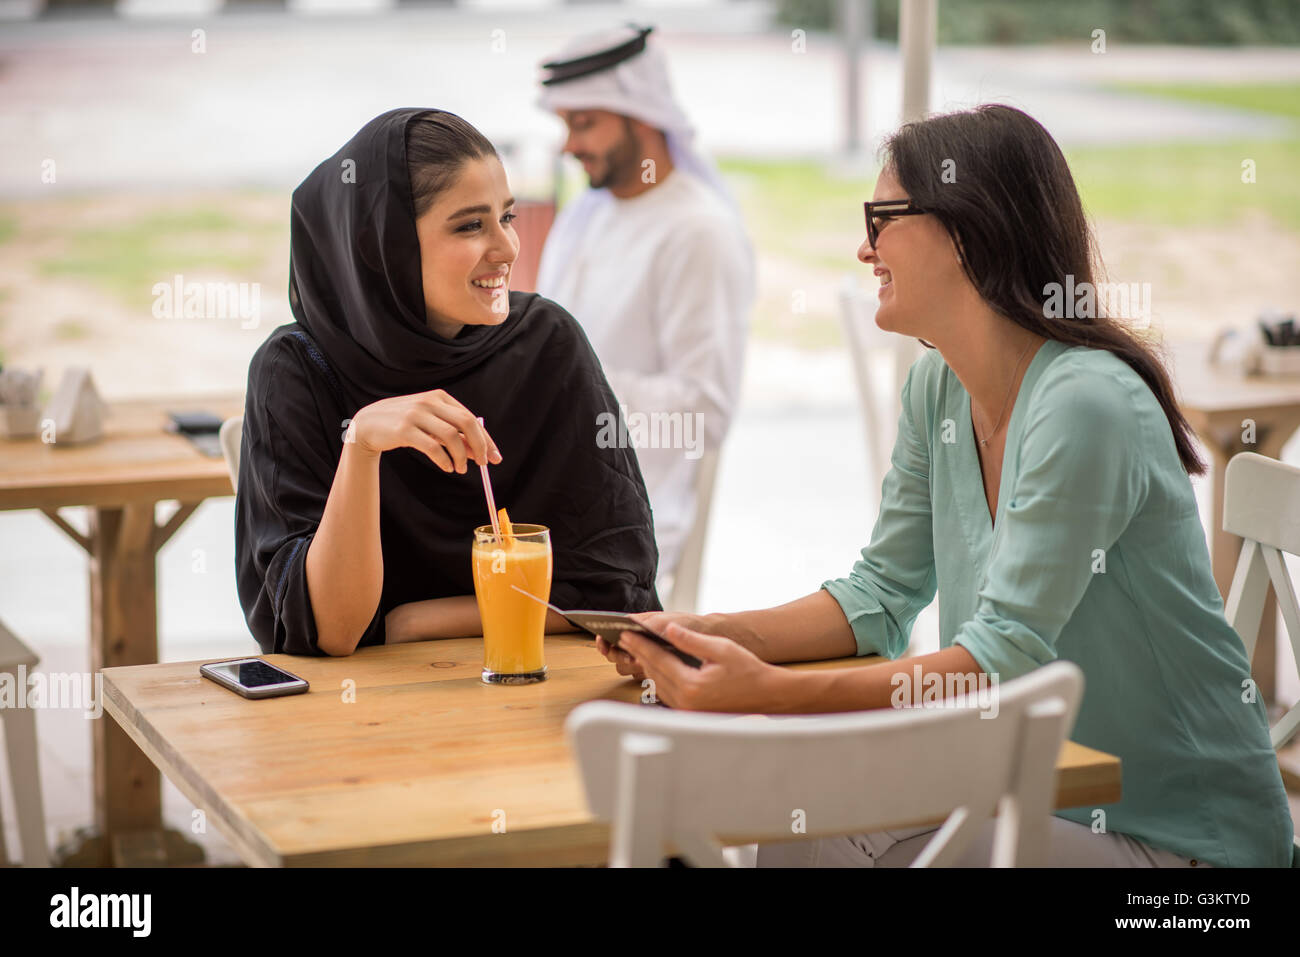 Young middle eastern woman wearing traditional clothing talking with female friend at cafe, Dubai, United Arab Emirates Stock Photo